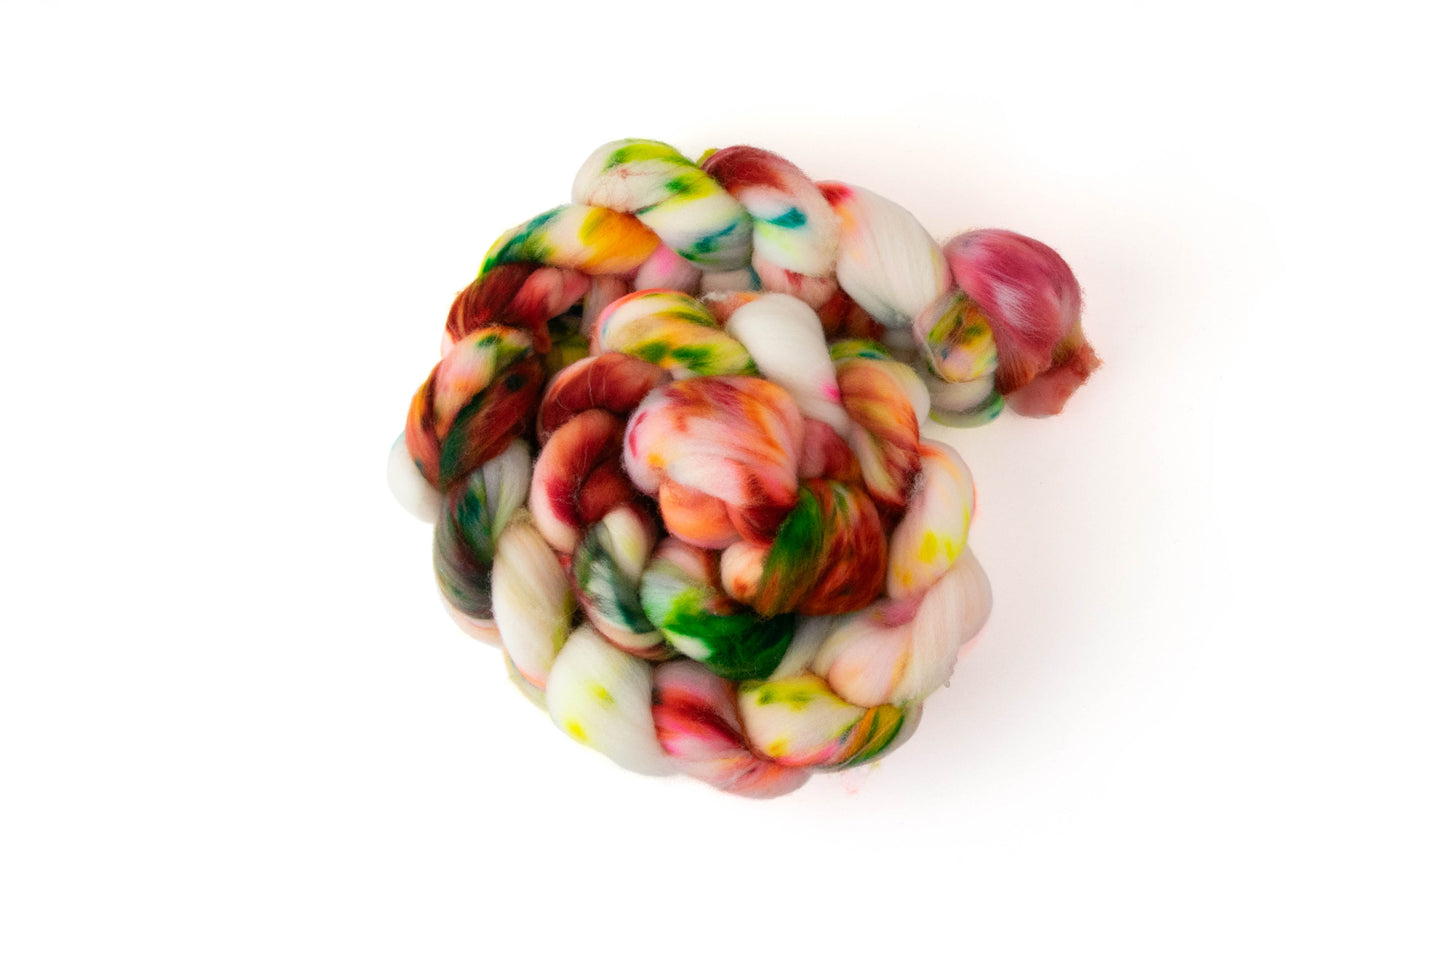 A braid of fiber with sections of dark red and green and neon yellow, orange, and pink on a white background.